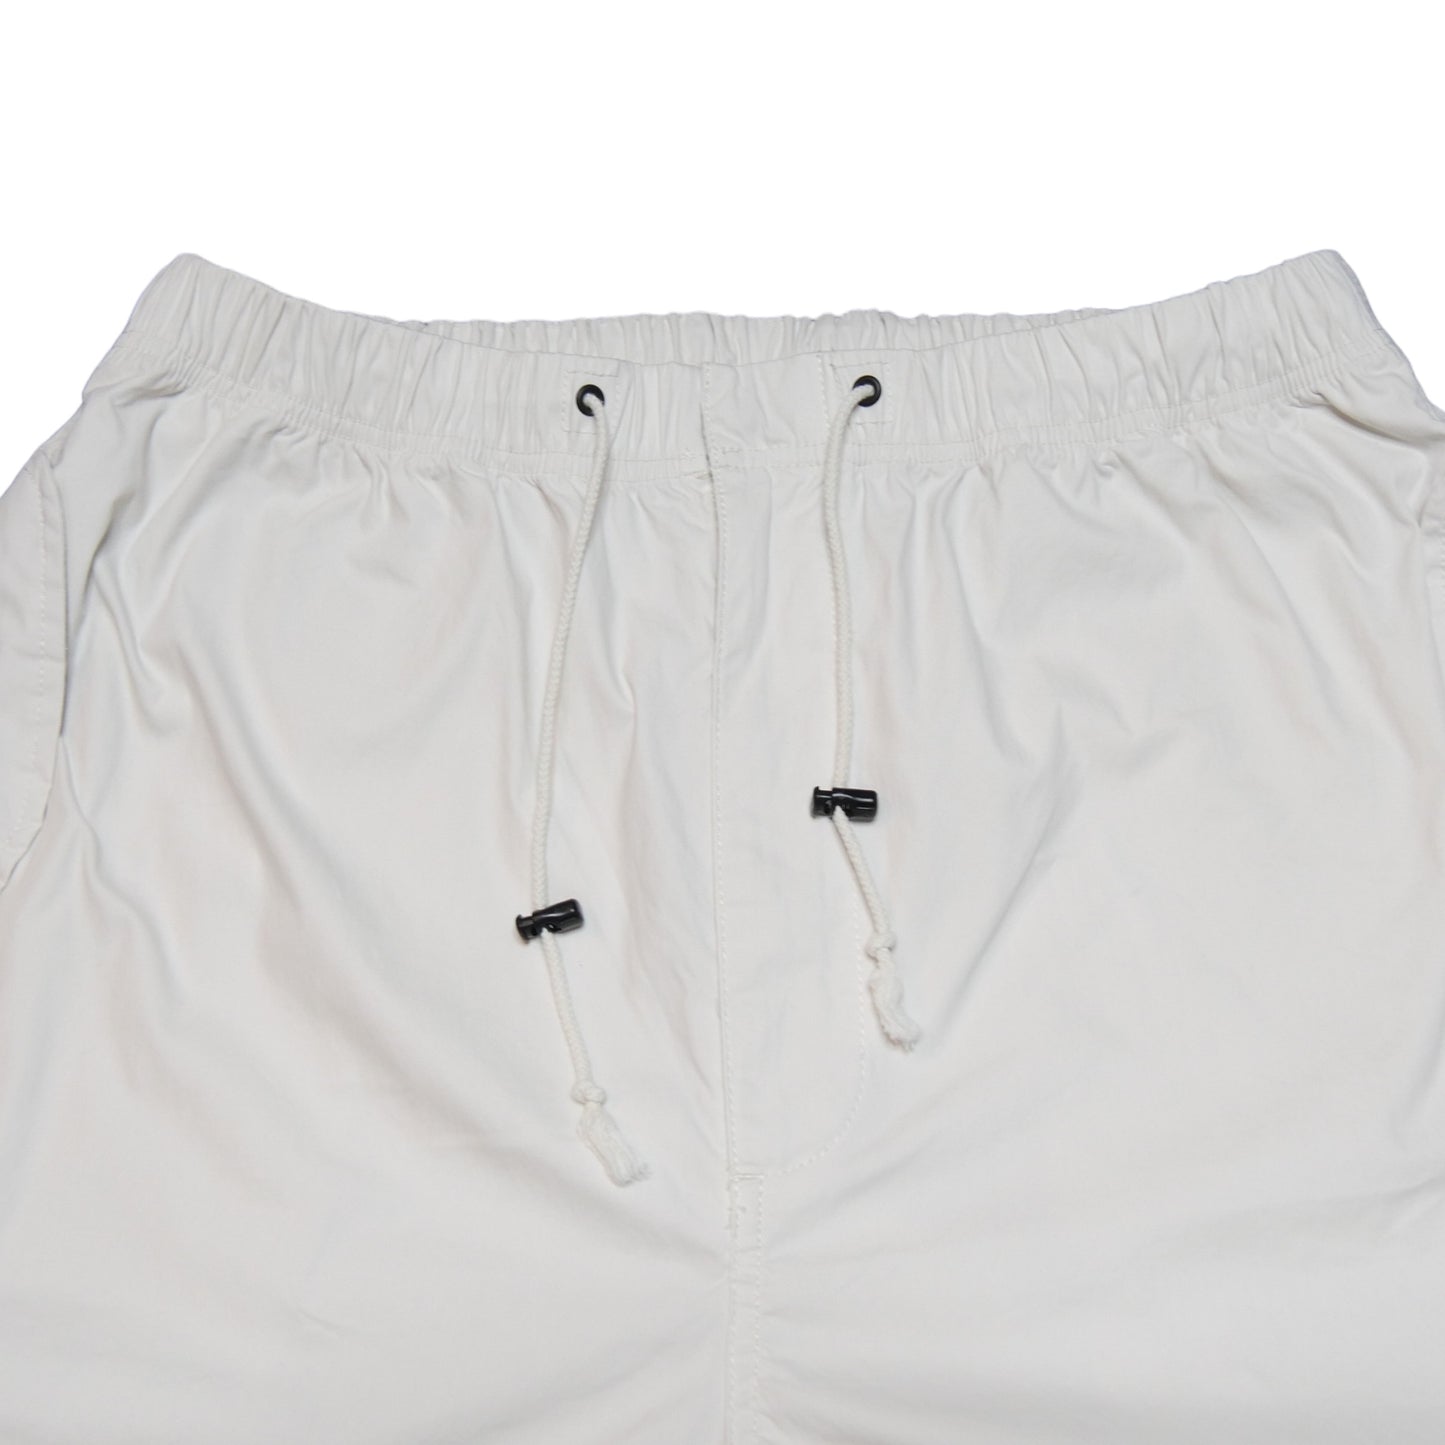 Stussy Nyco Overtrousers Pants - Medium